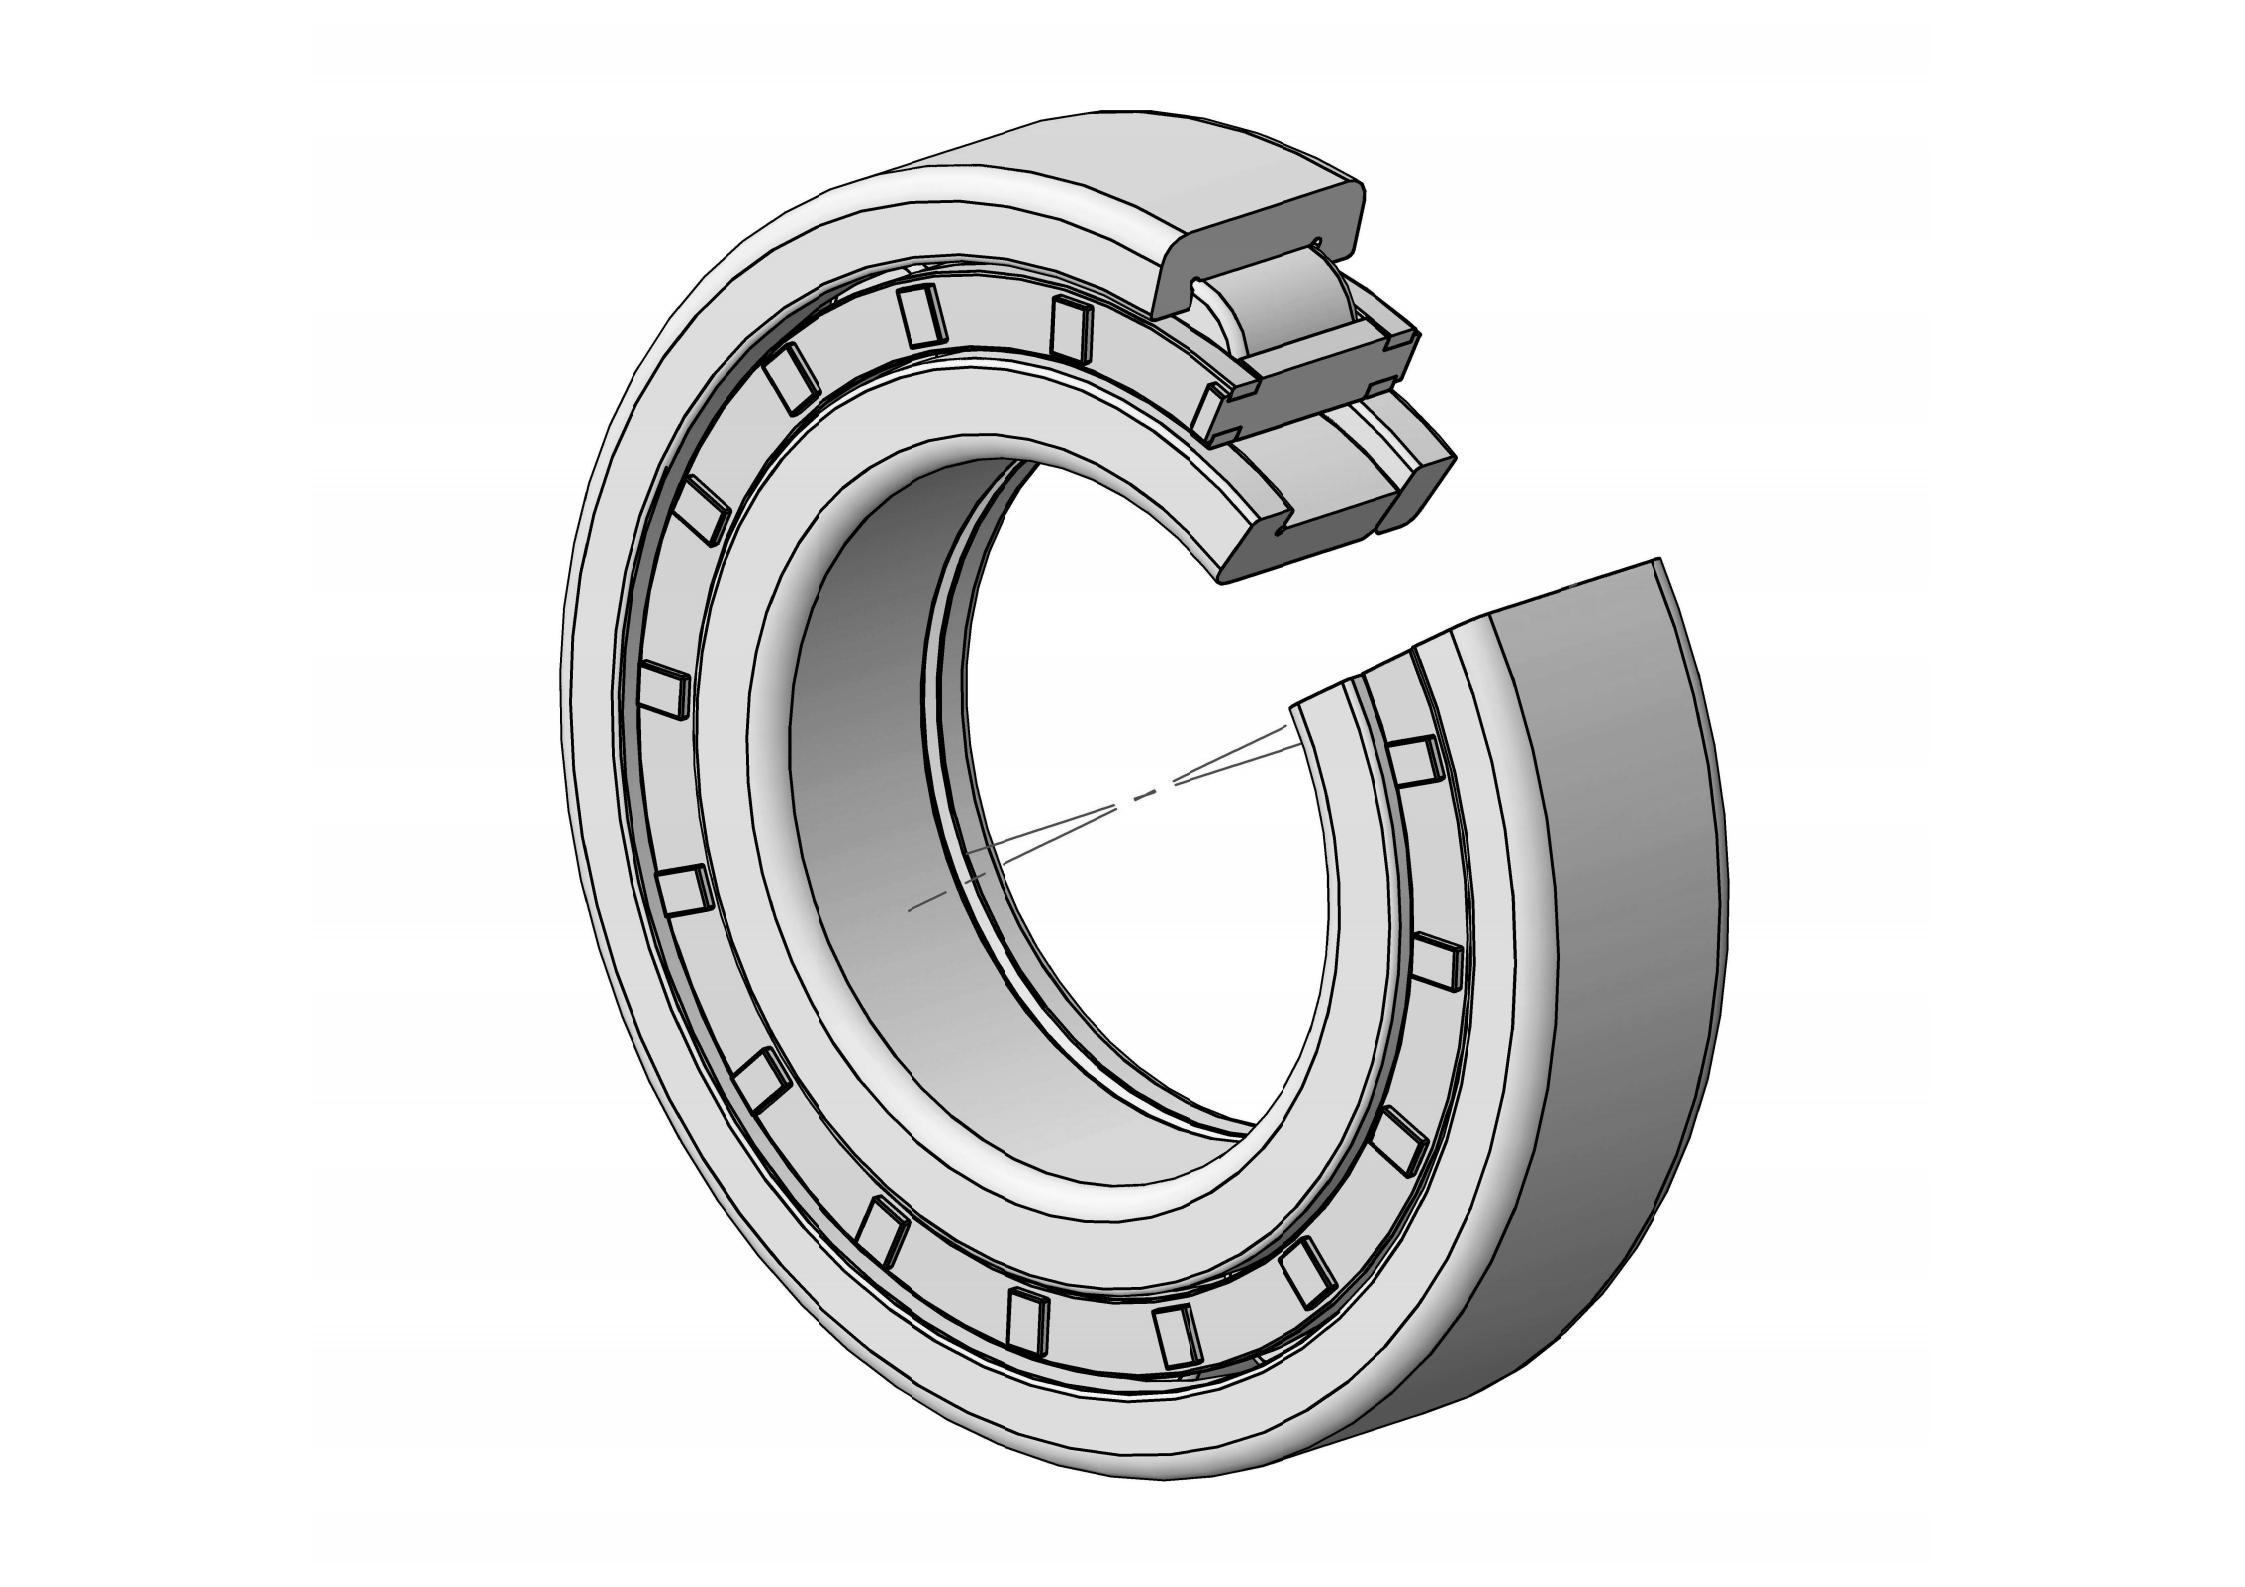 NUP2317-EM Single Row Cylindrical roller bearing 